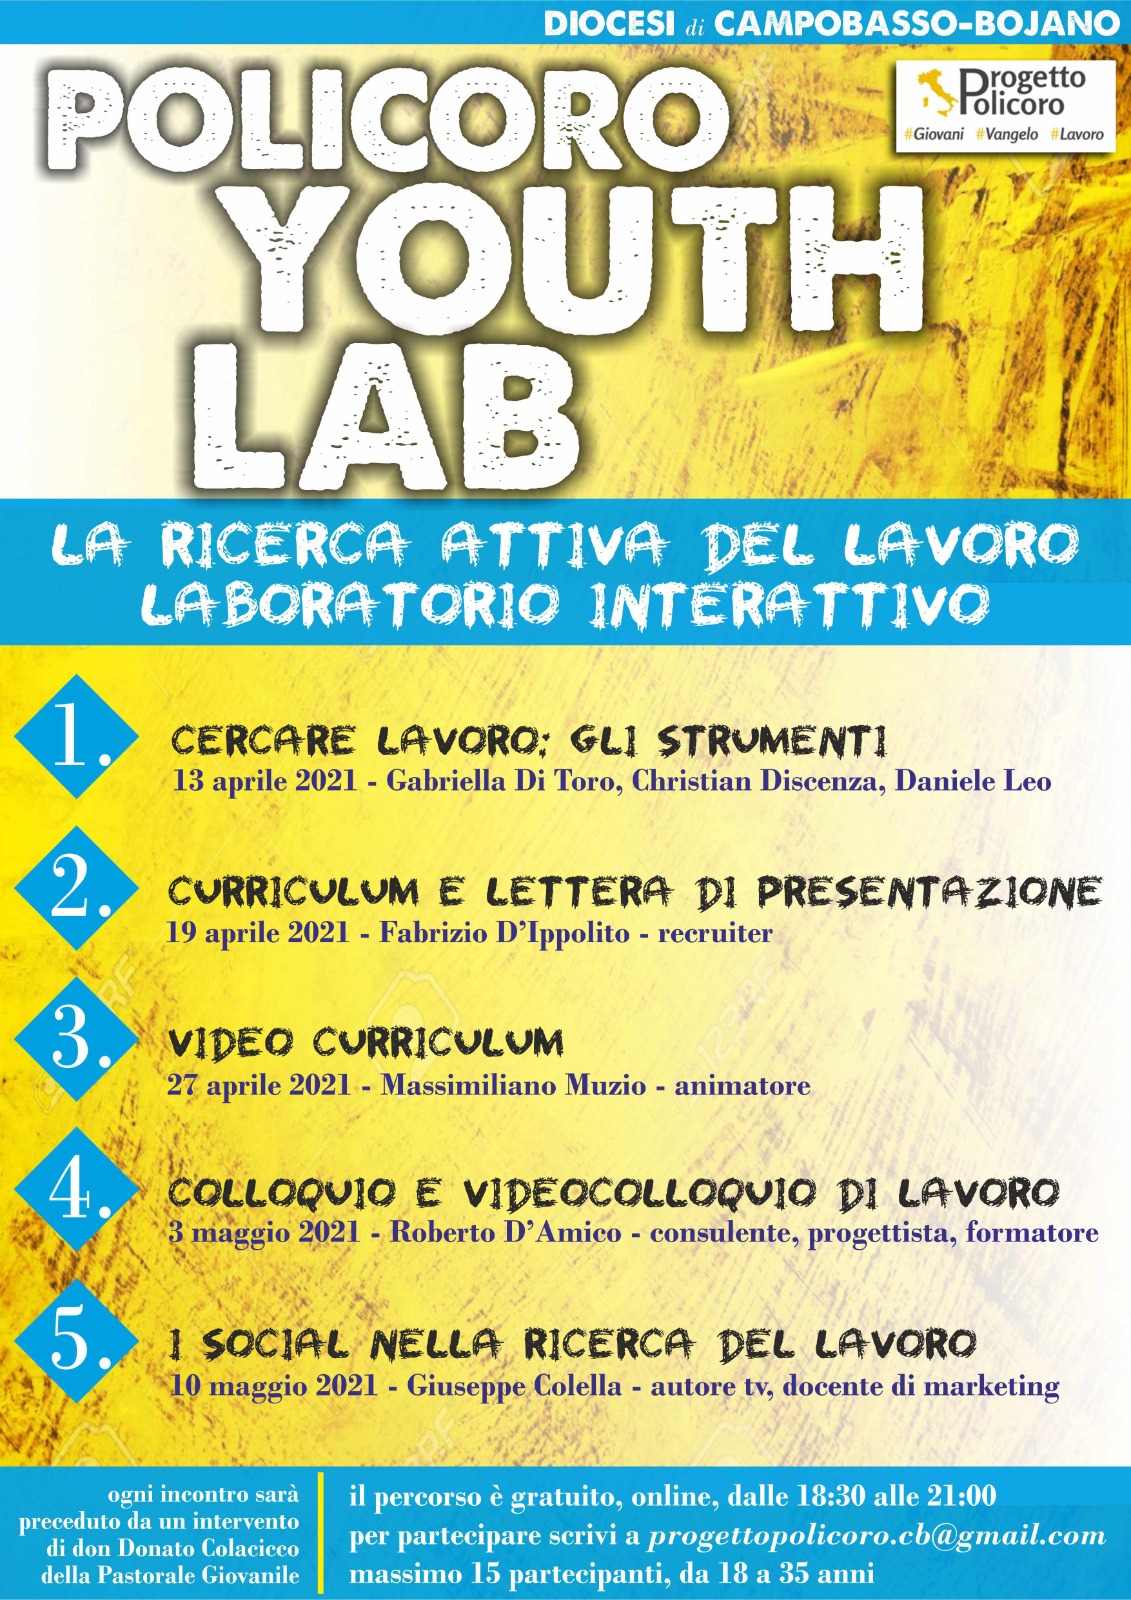 Policoro Youth Lab